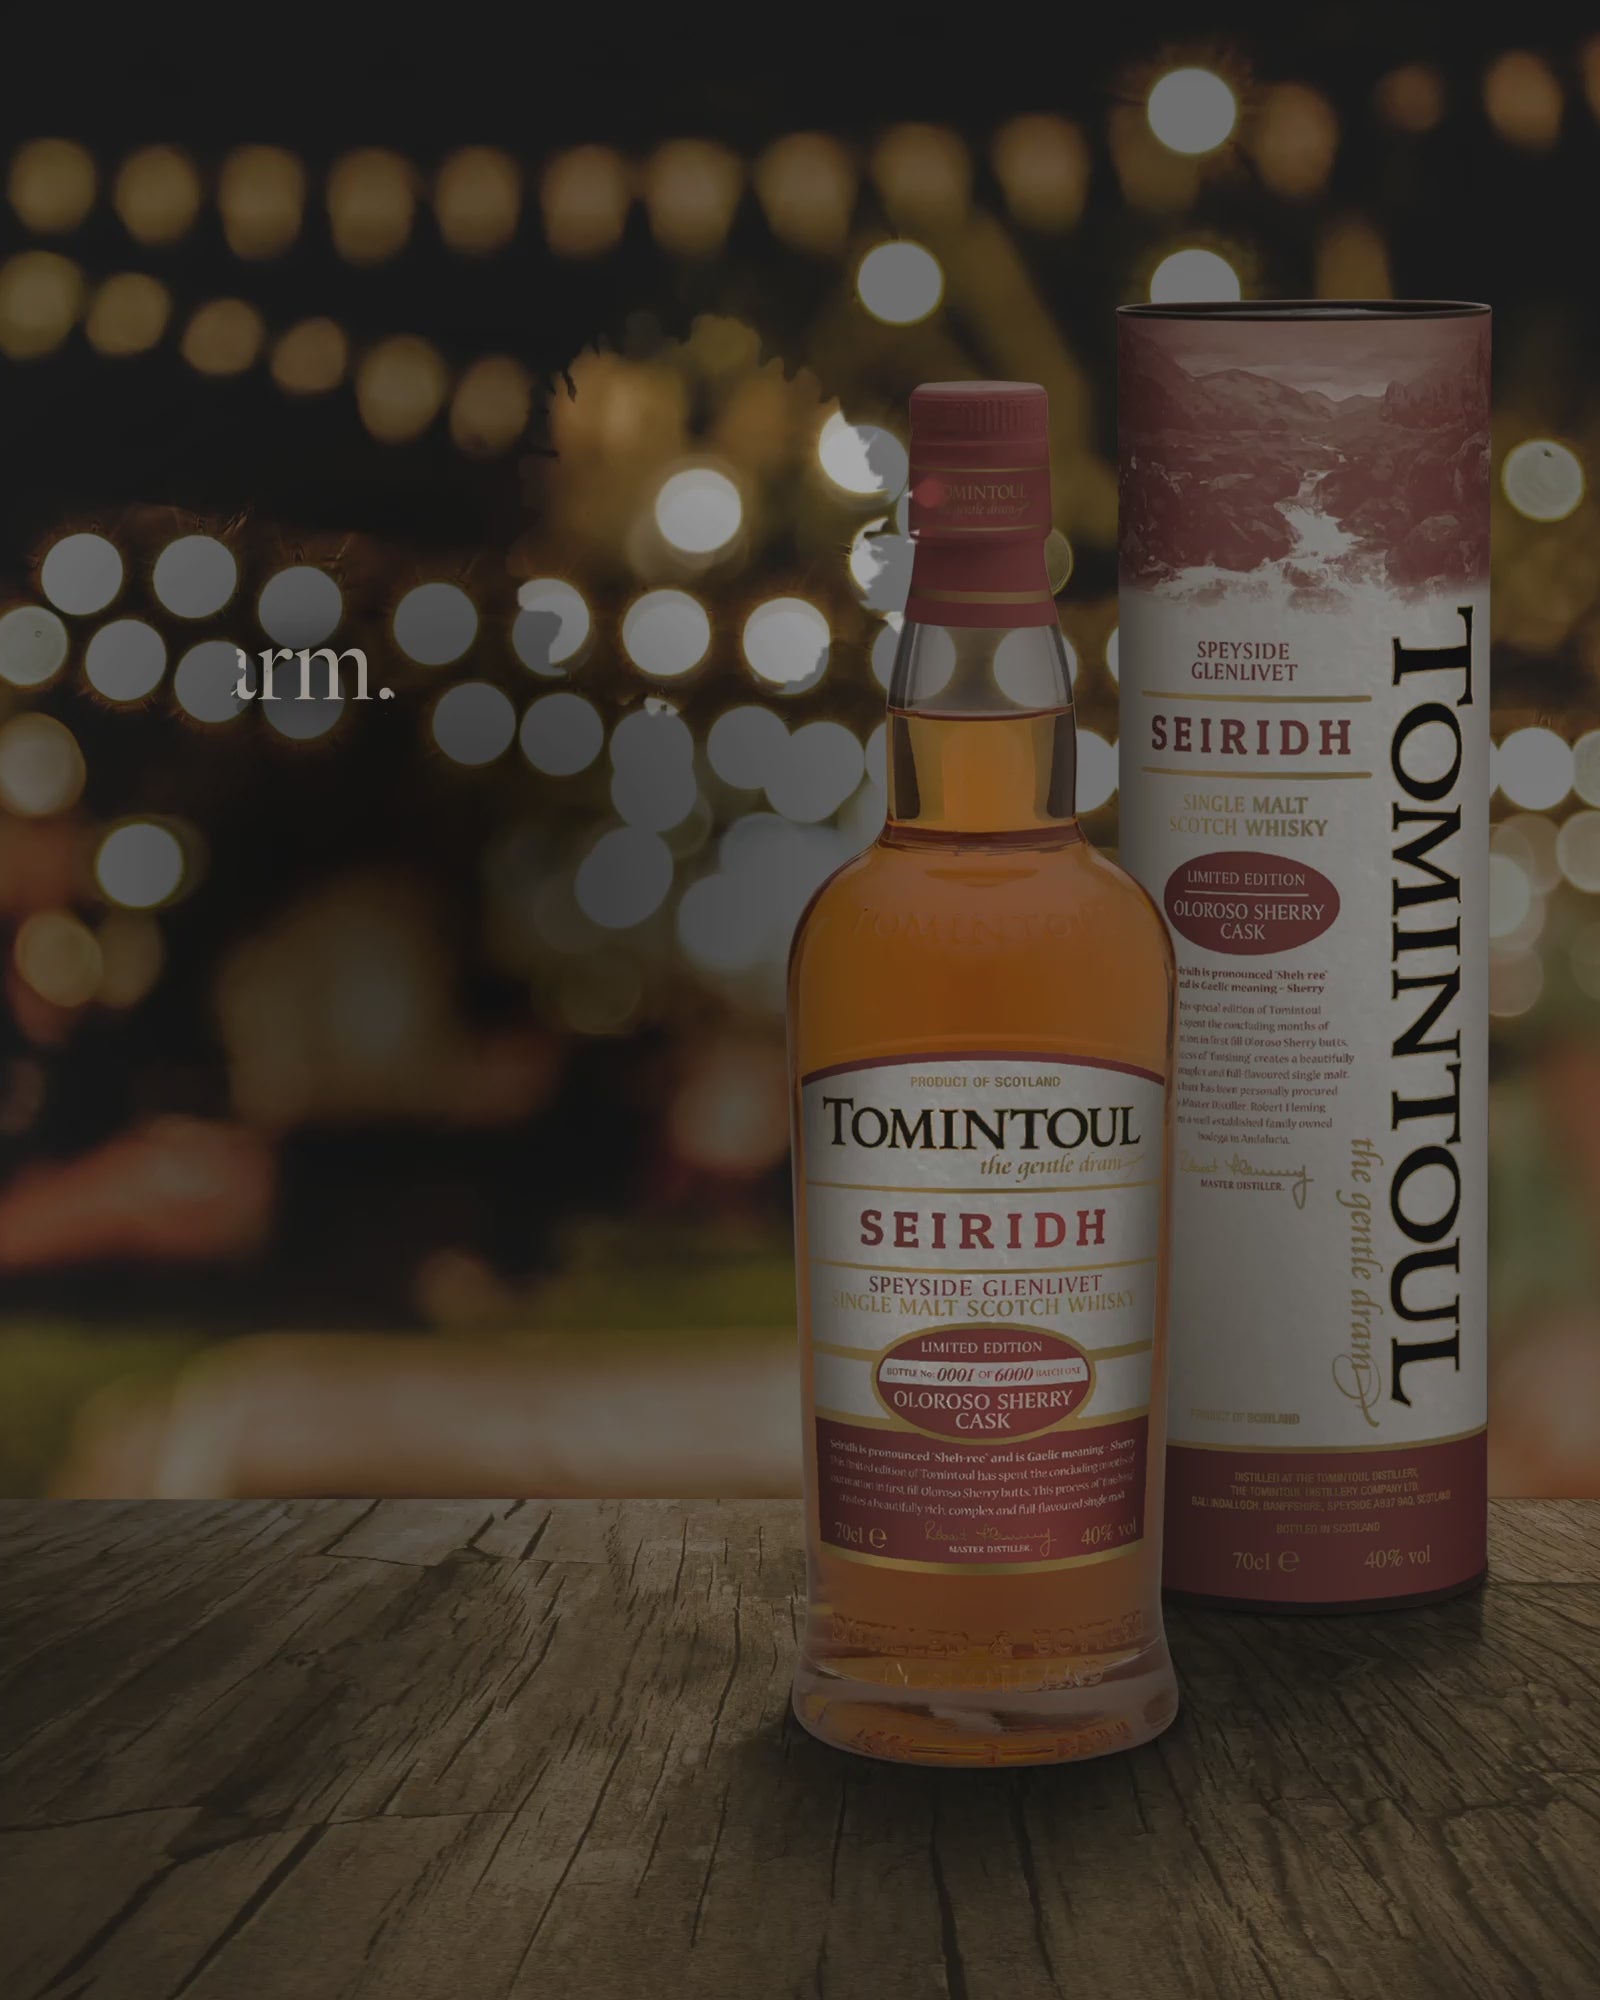 Tomintoul Seiridh Oloroso Sherry Cask Whisky